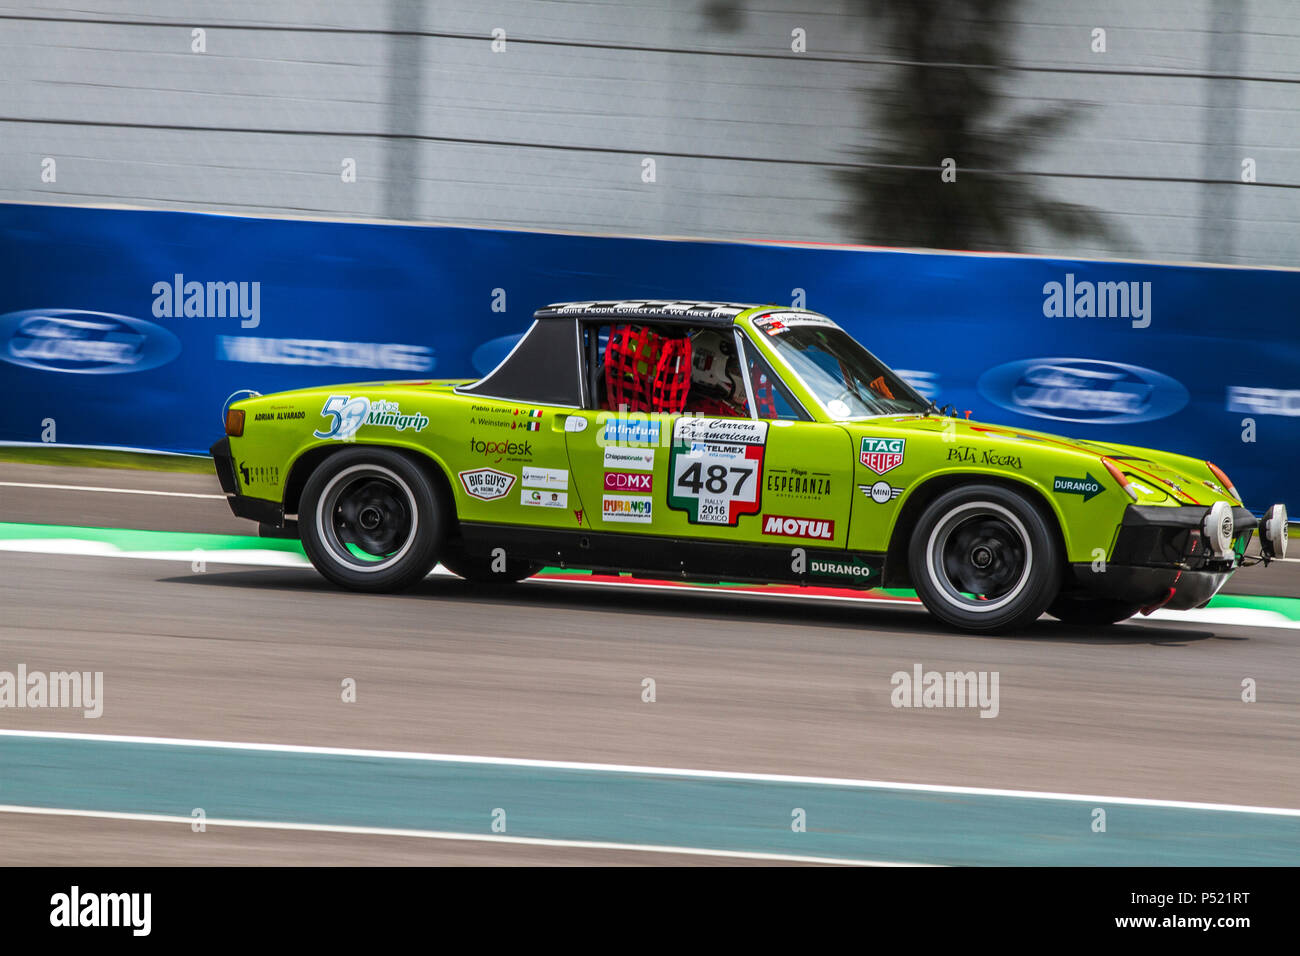 Mexico City, Mexico – September 01, 2017: Autodromo Hermanos Rodriguez. FIA World Endurance Championship WEC. Pablo Lorant & A. Weinstein No.487 running his 1969-1976 VW Porsche 914 at the free practice for the Mexico Vintage Series. Stock Photo